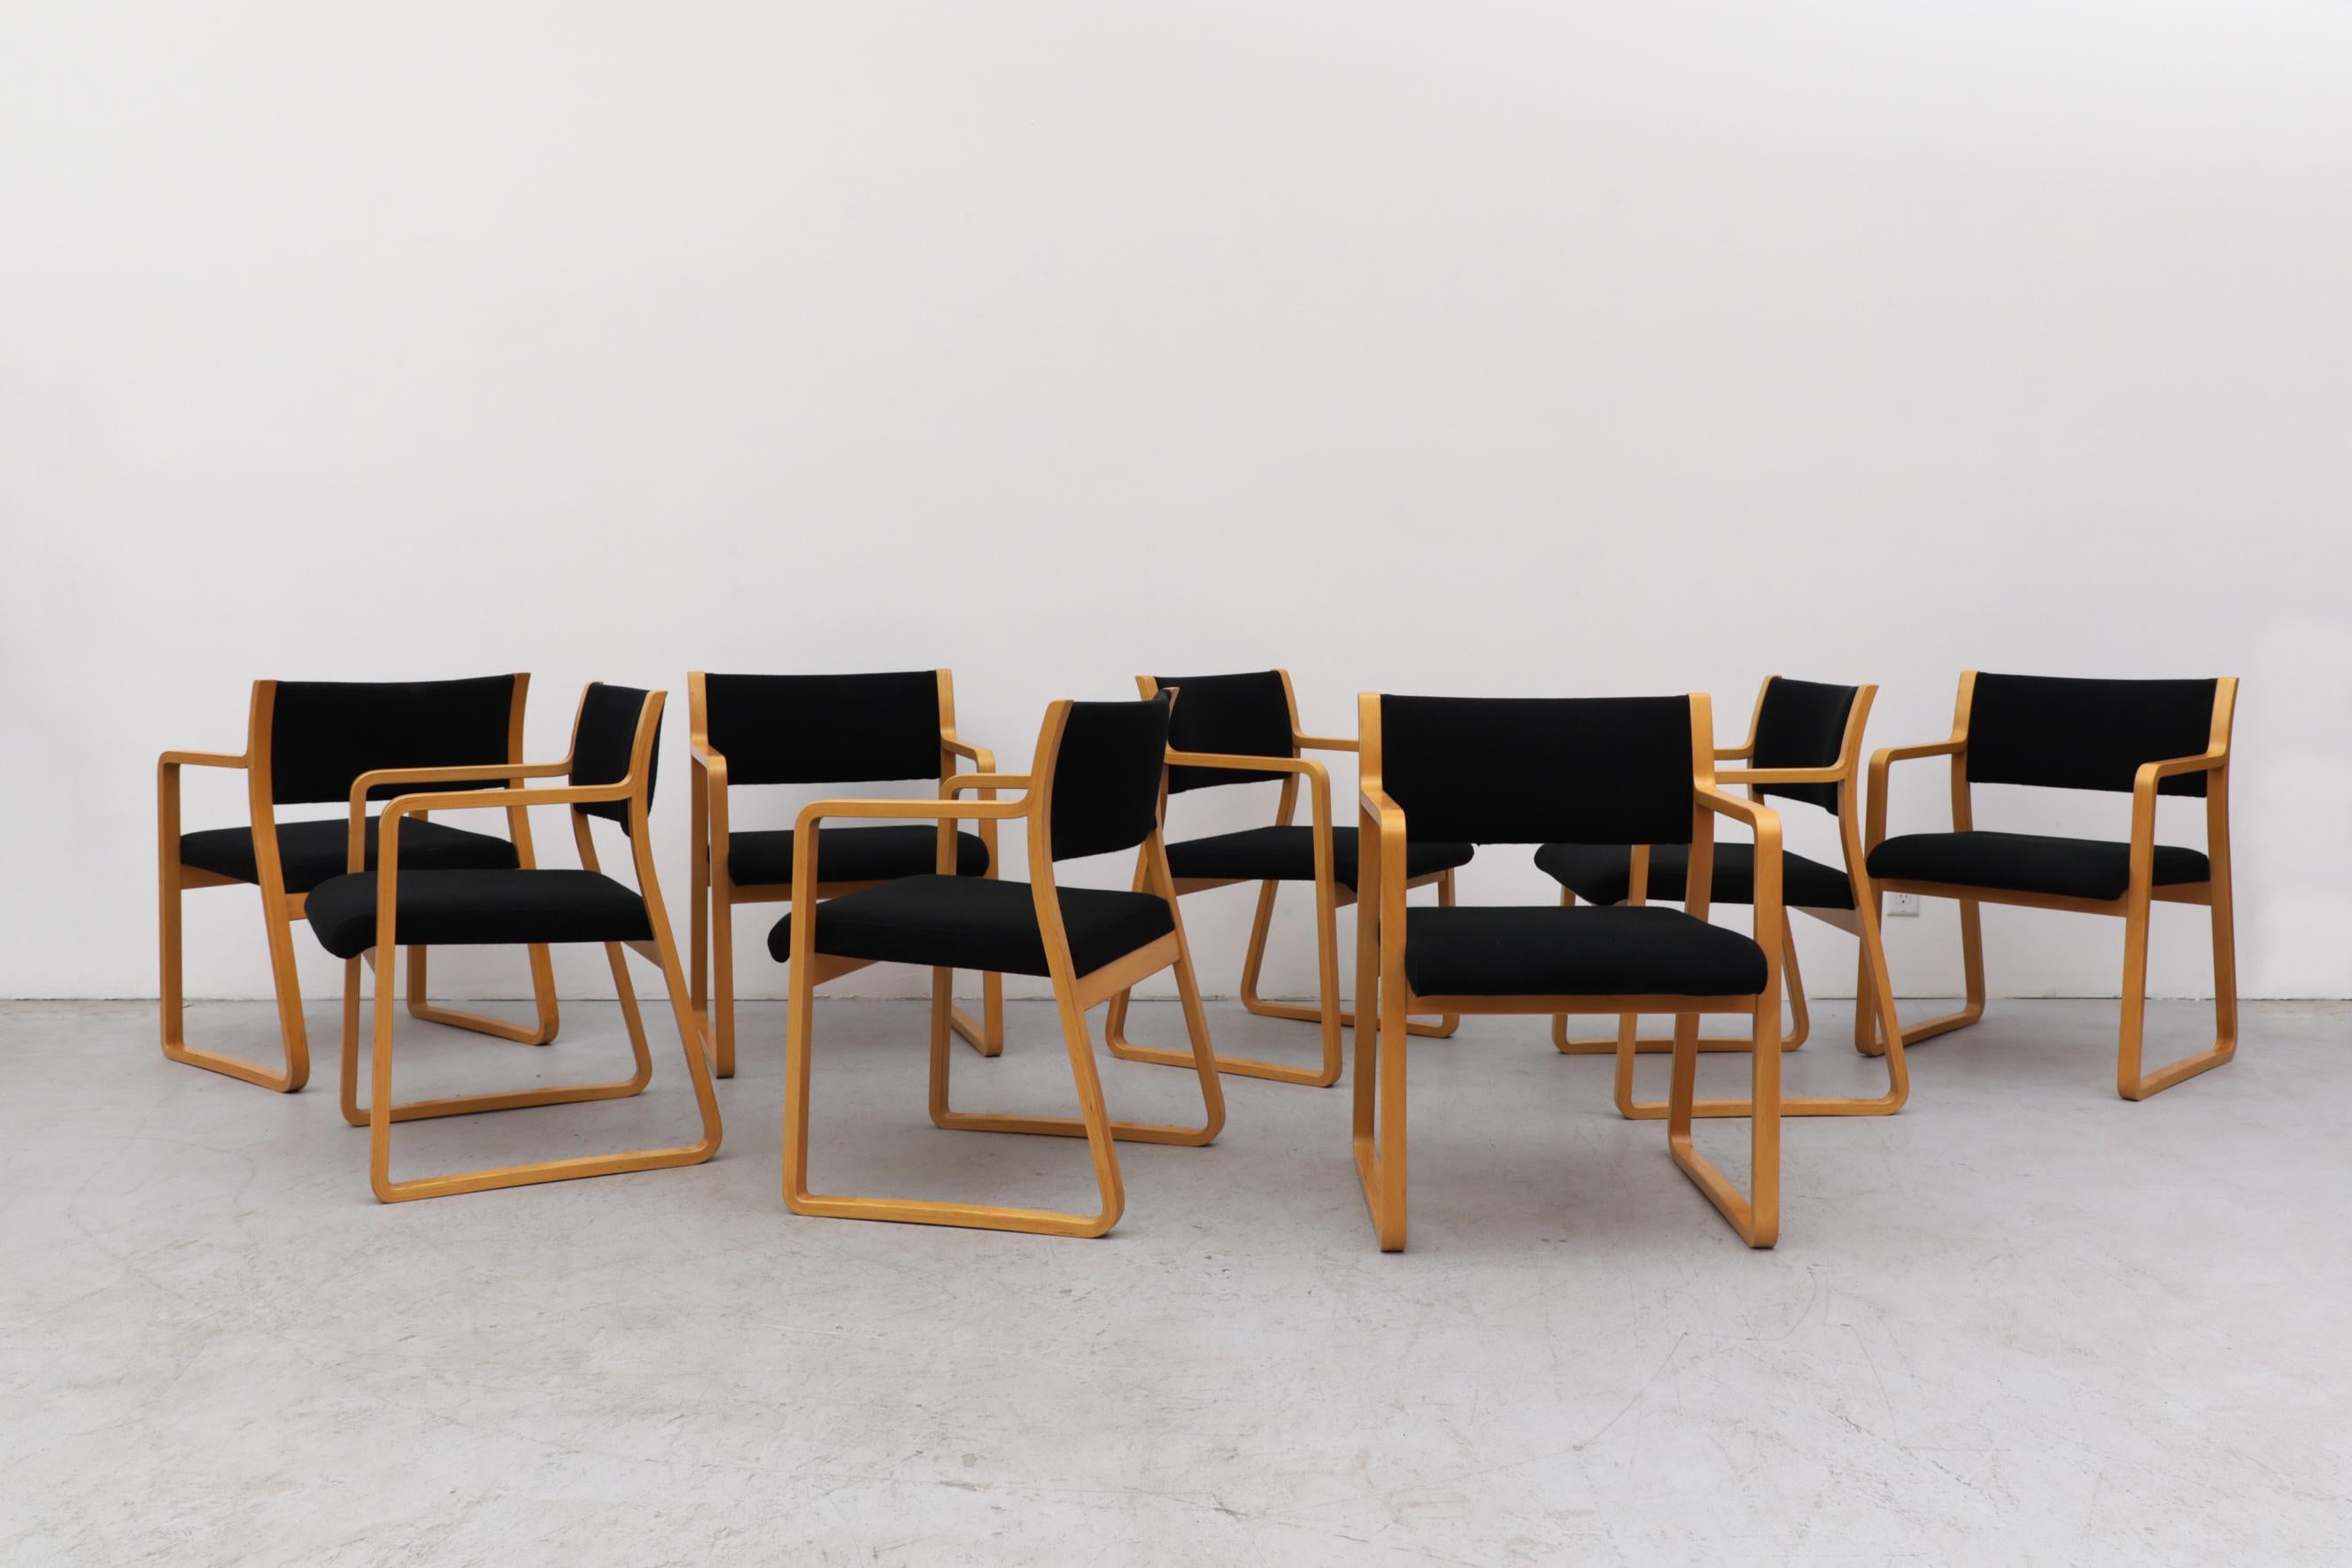 Set of 8 Alvar Aalto style Danish Armchairs with black upholstered seating. Beautiful bent wood frames with original black fabric. Seat width is 19.5